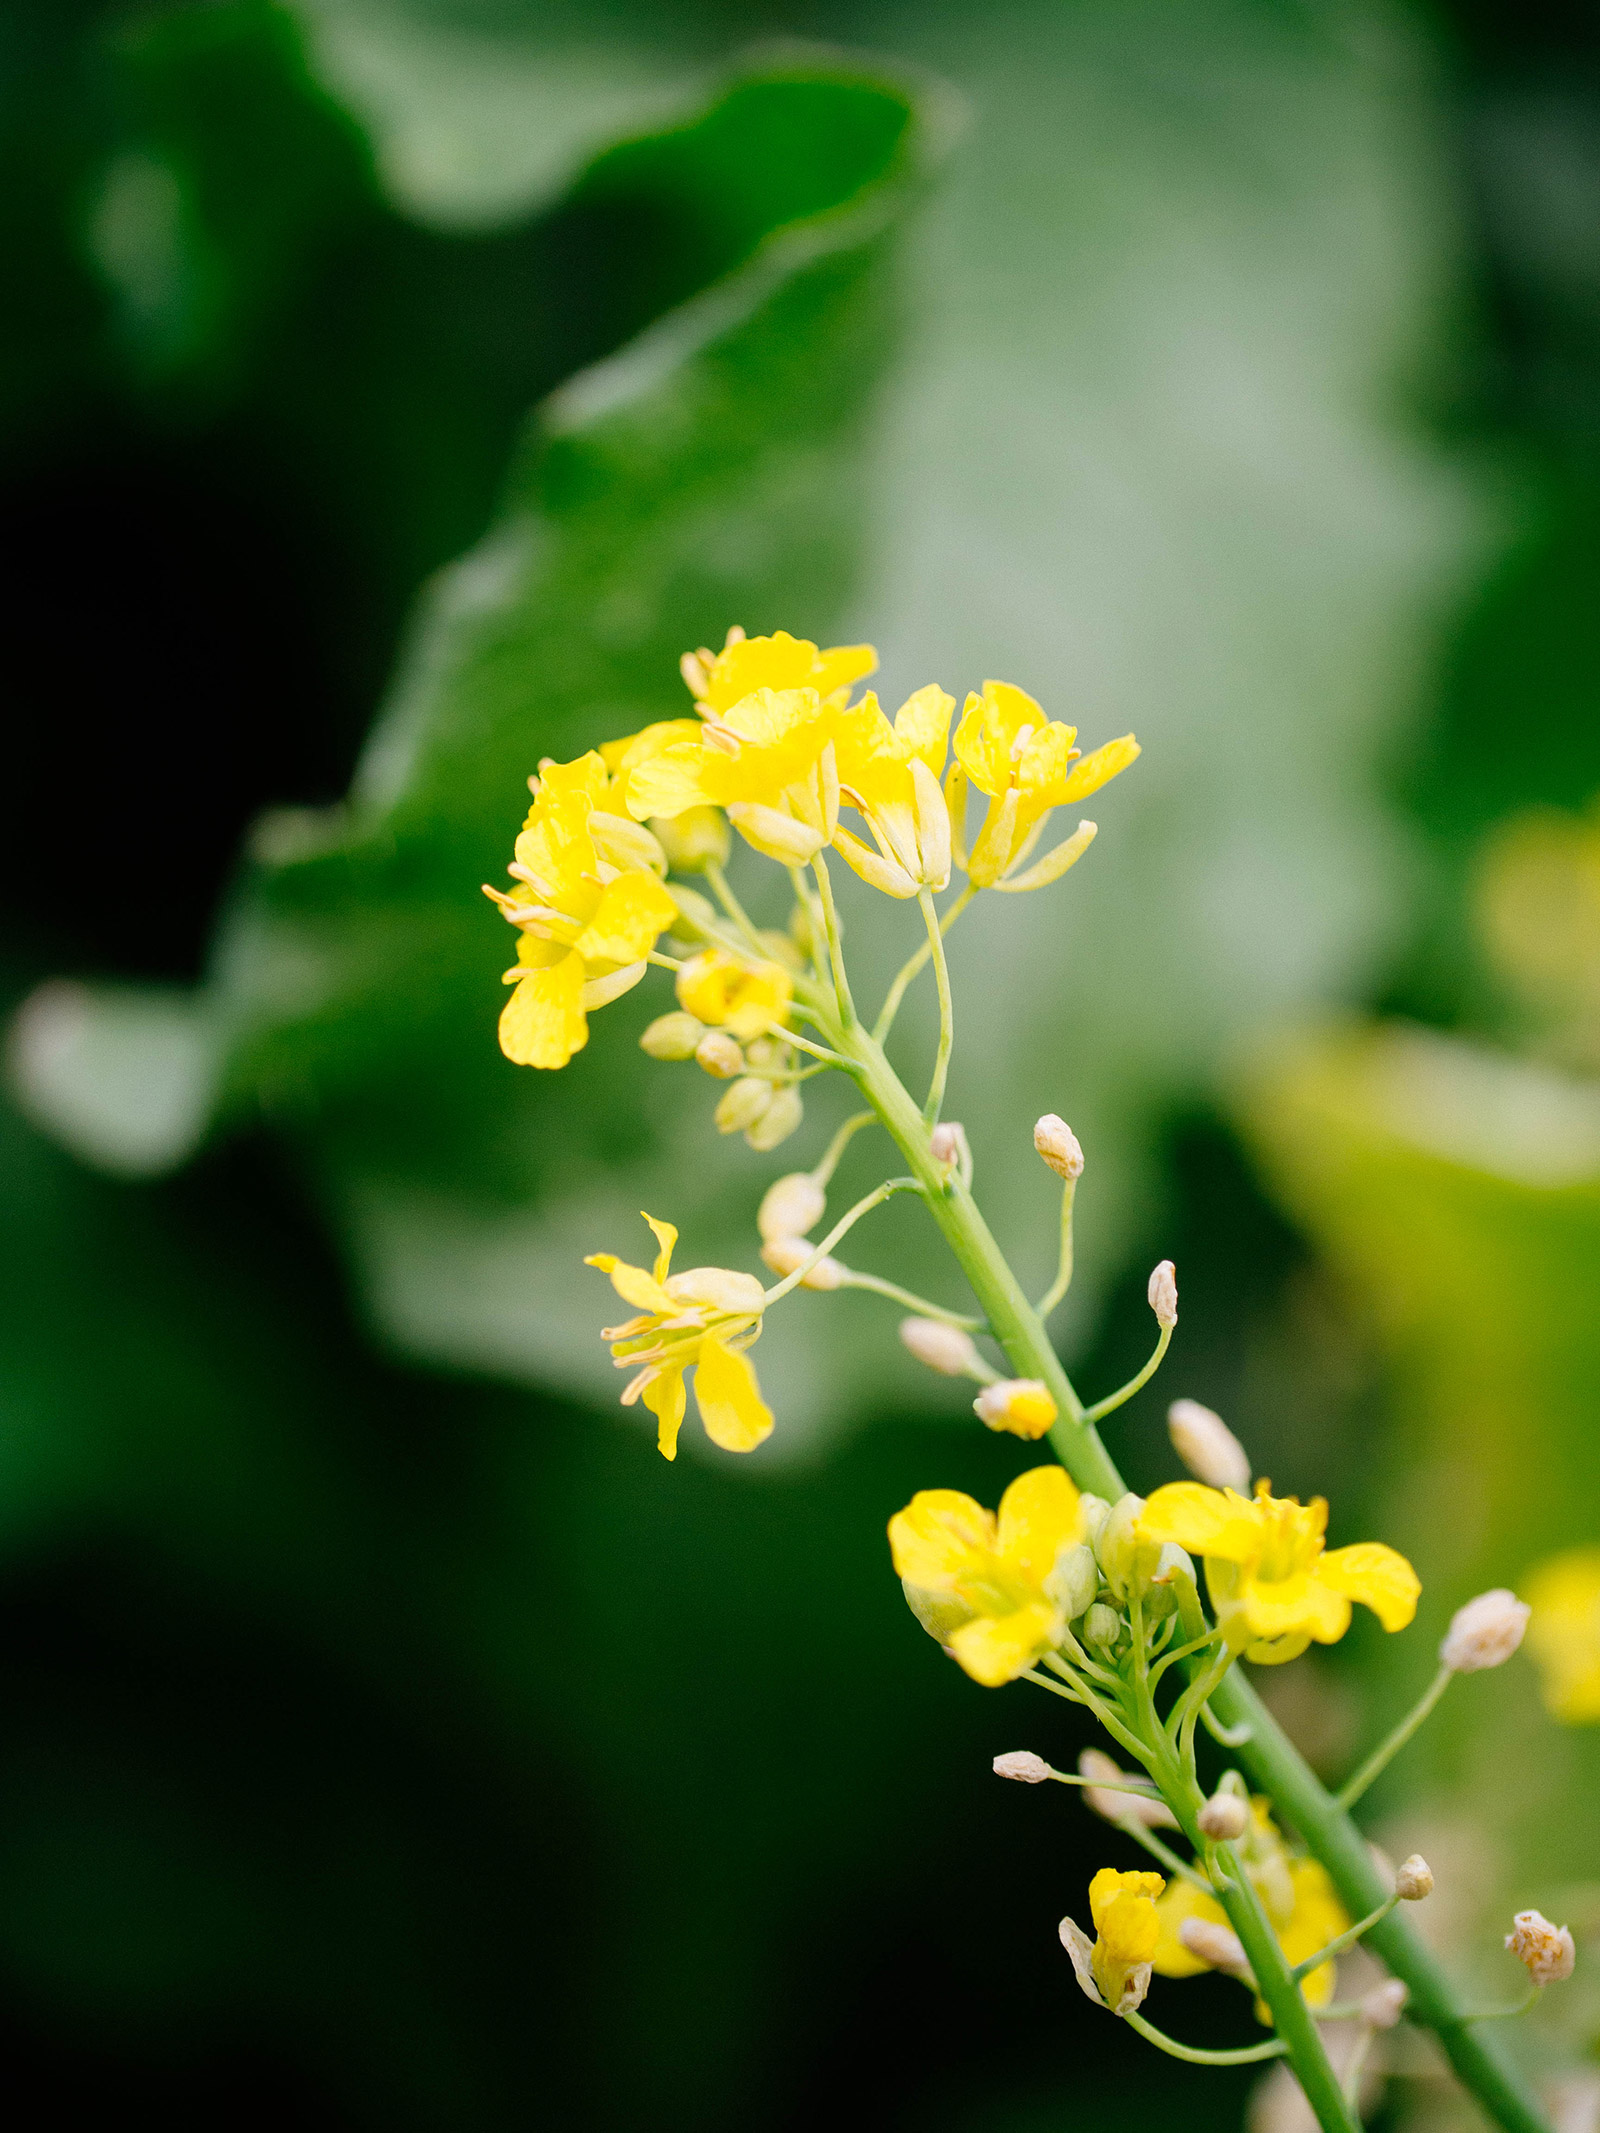 Close-up of yellow kale flowers on a stem